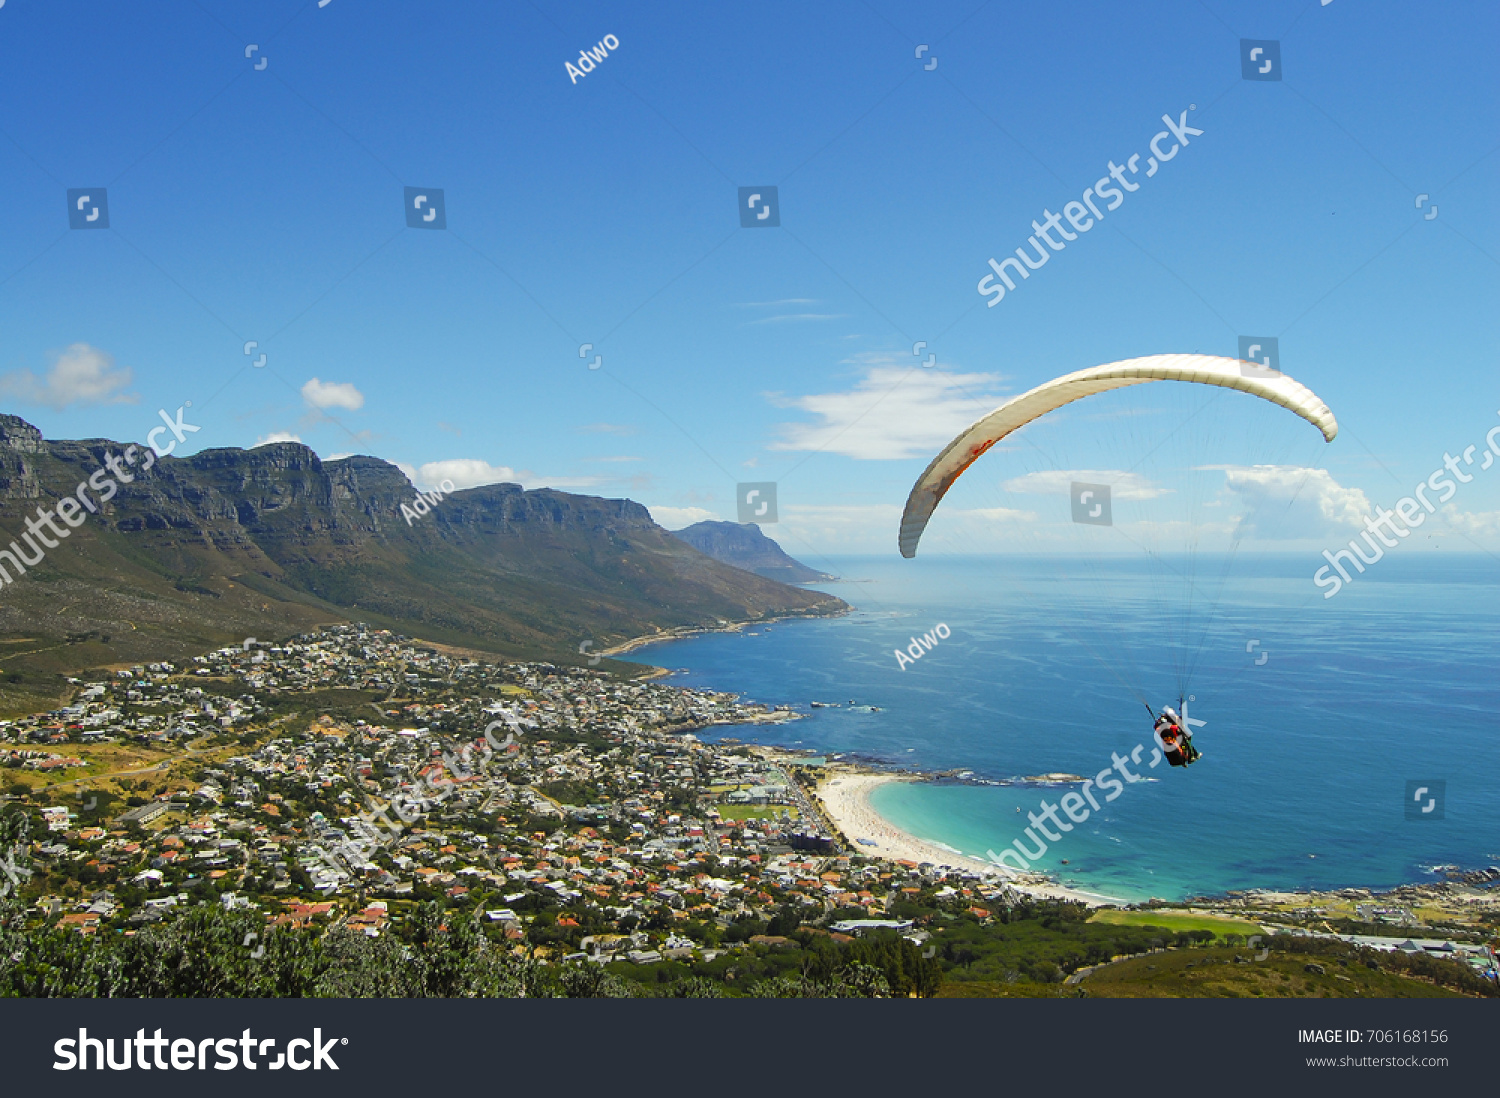 Paragliding - Cape Town - South Africa #706168156